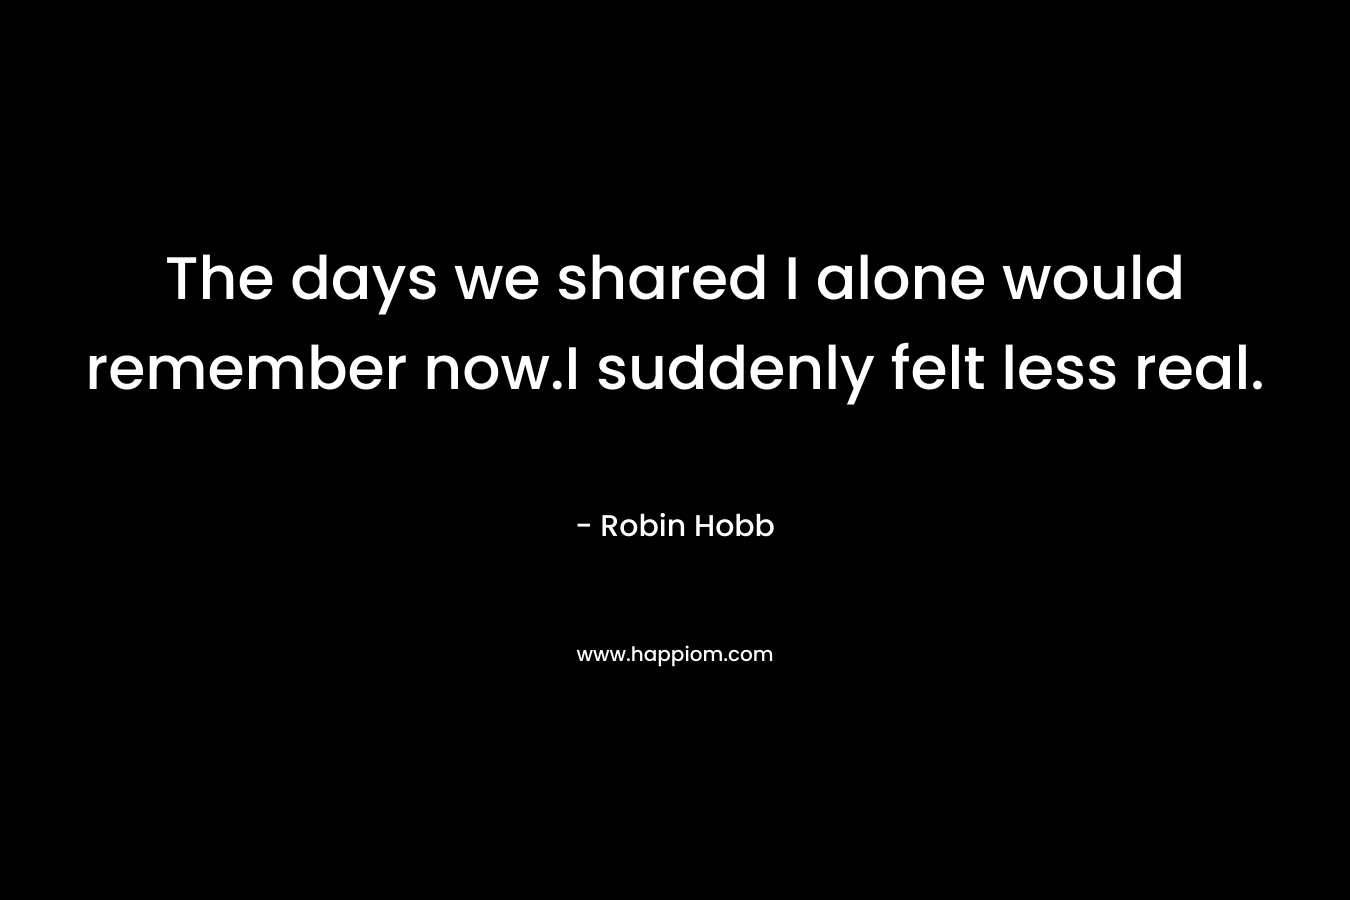 The days we shared I alone would remember now.I suddenly felt less real.